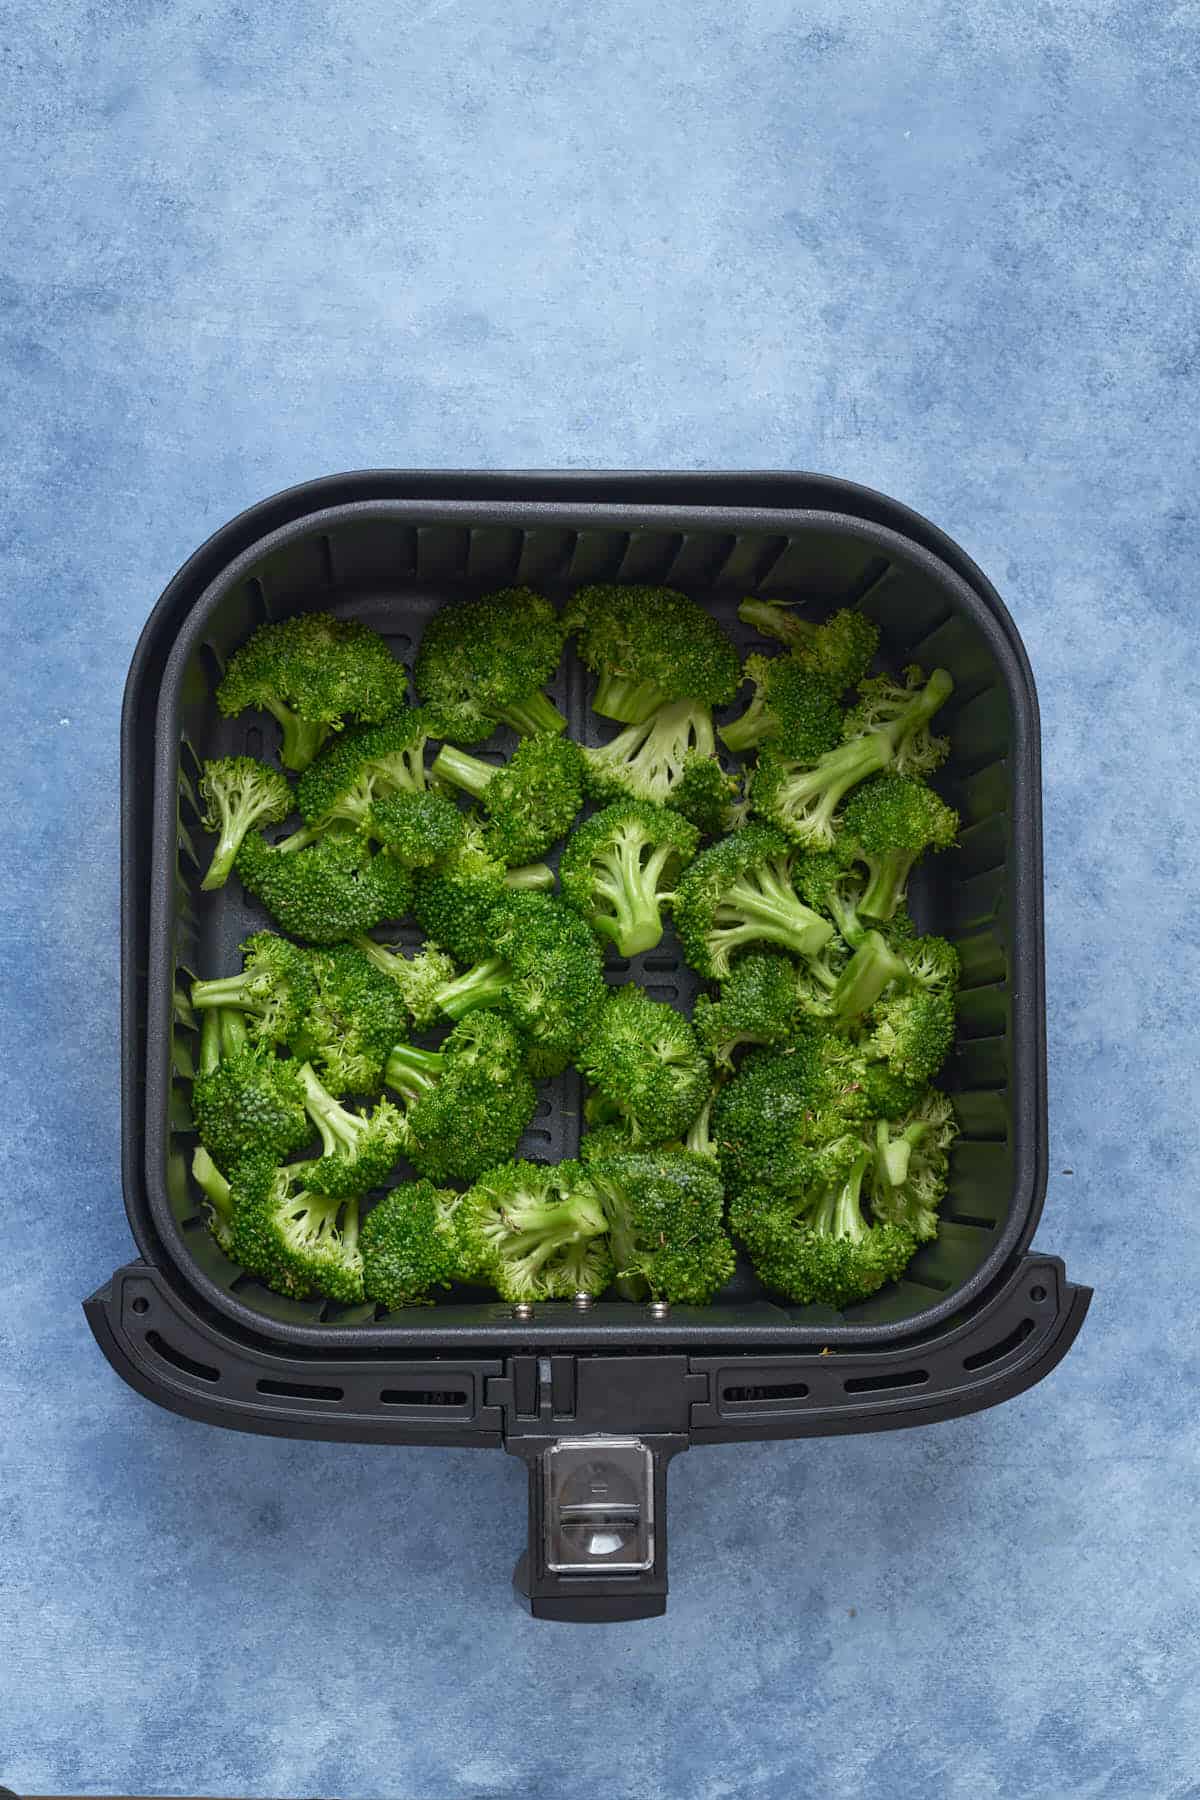 Uncooked broccoli in the air fryer.